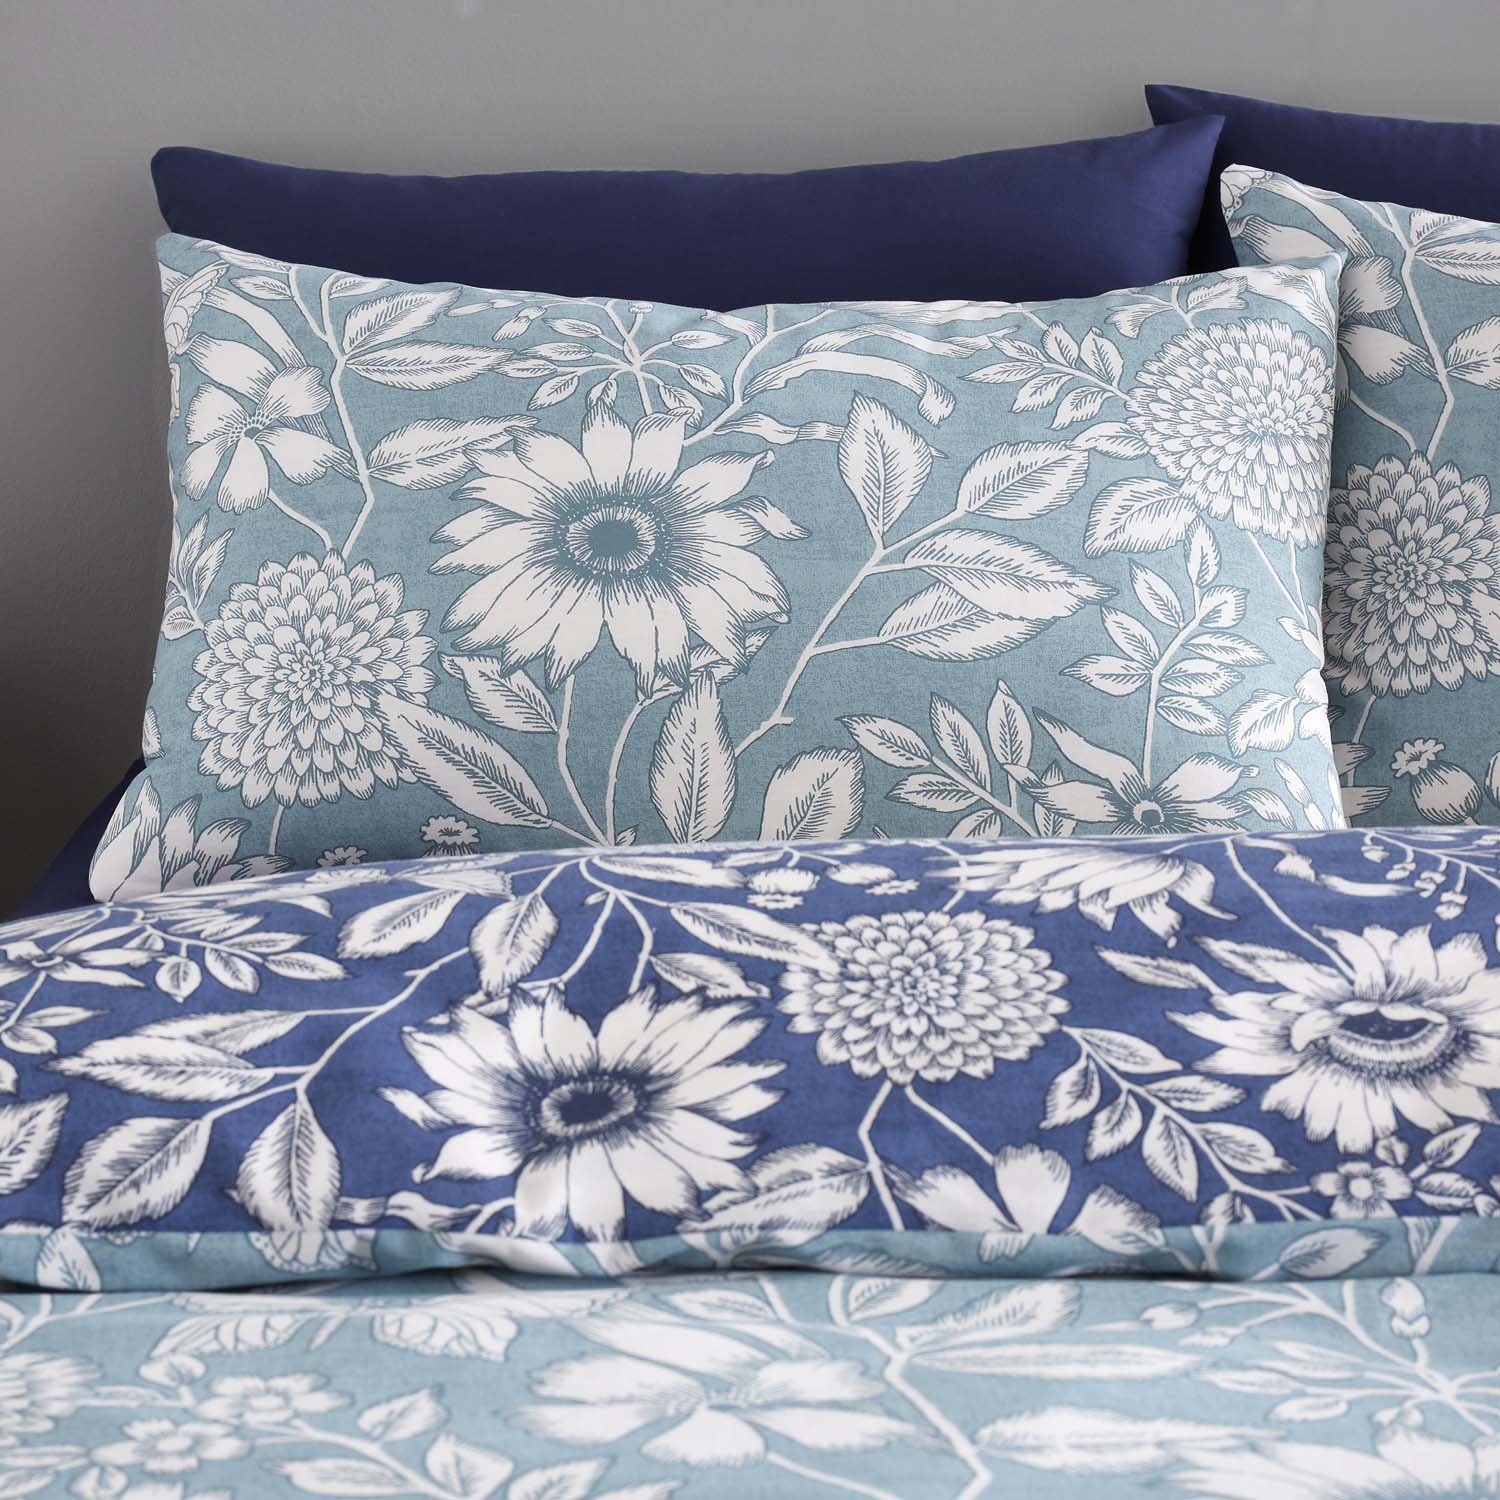  Catherine Lansfield Tapestry Floral Easy Care Duvet Cover Set - Blue 3 Shaws Department Stores